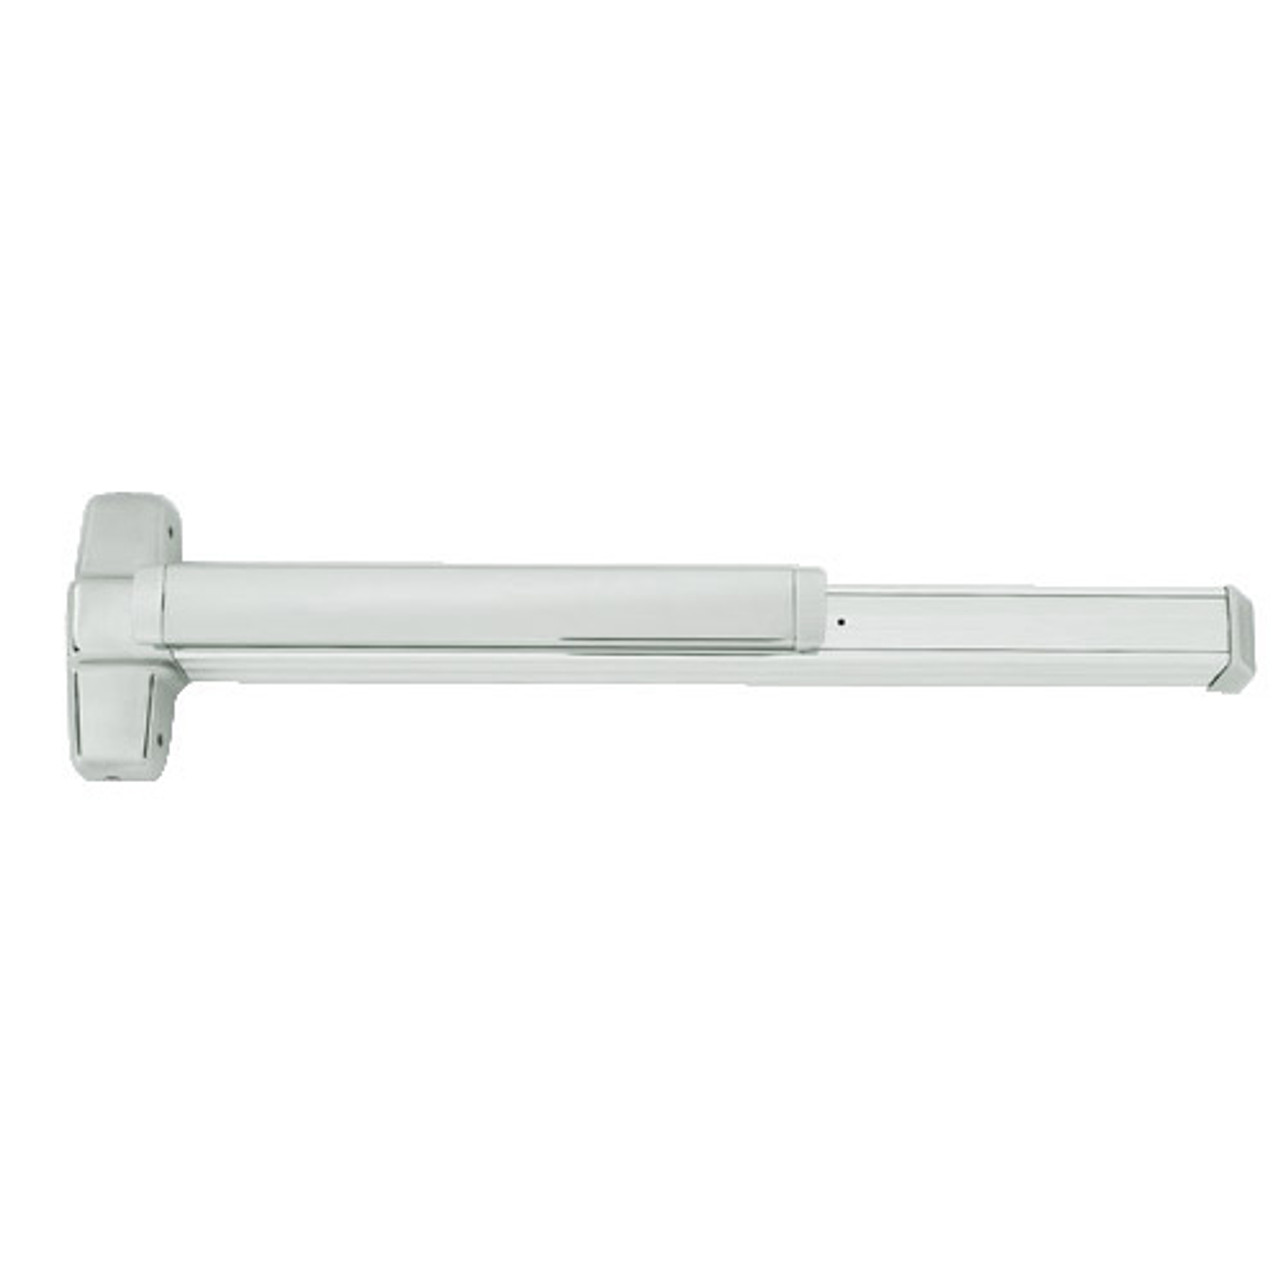 QEL9847WDC-EO-US26D-4 Von Duprin Exit Device with Quiet Electric Latch in Satin Chrome